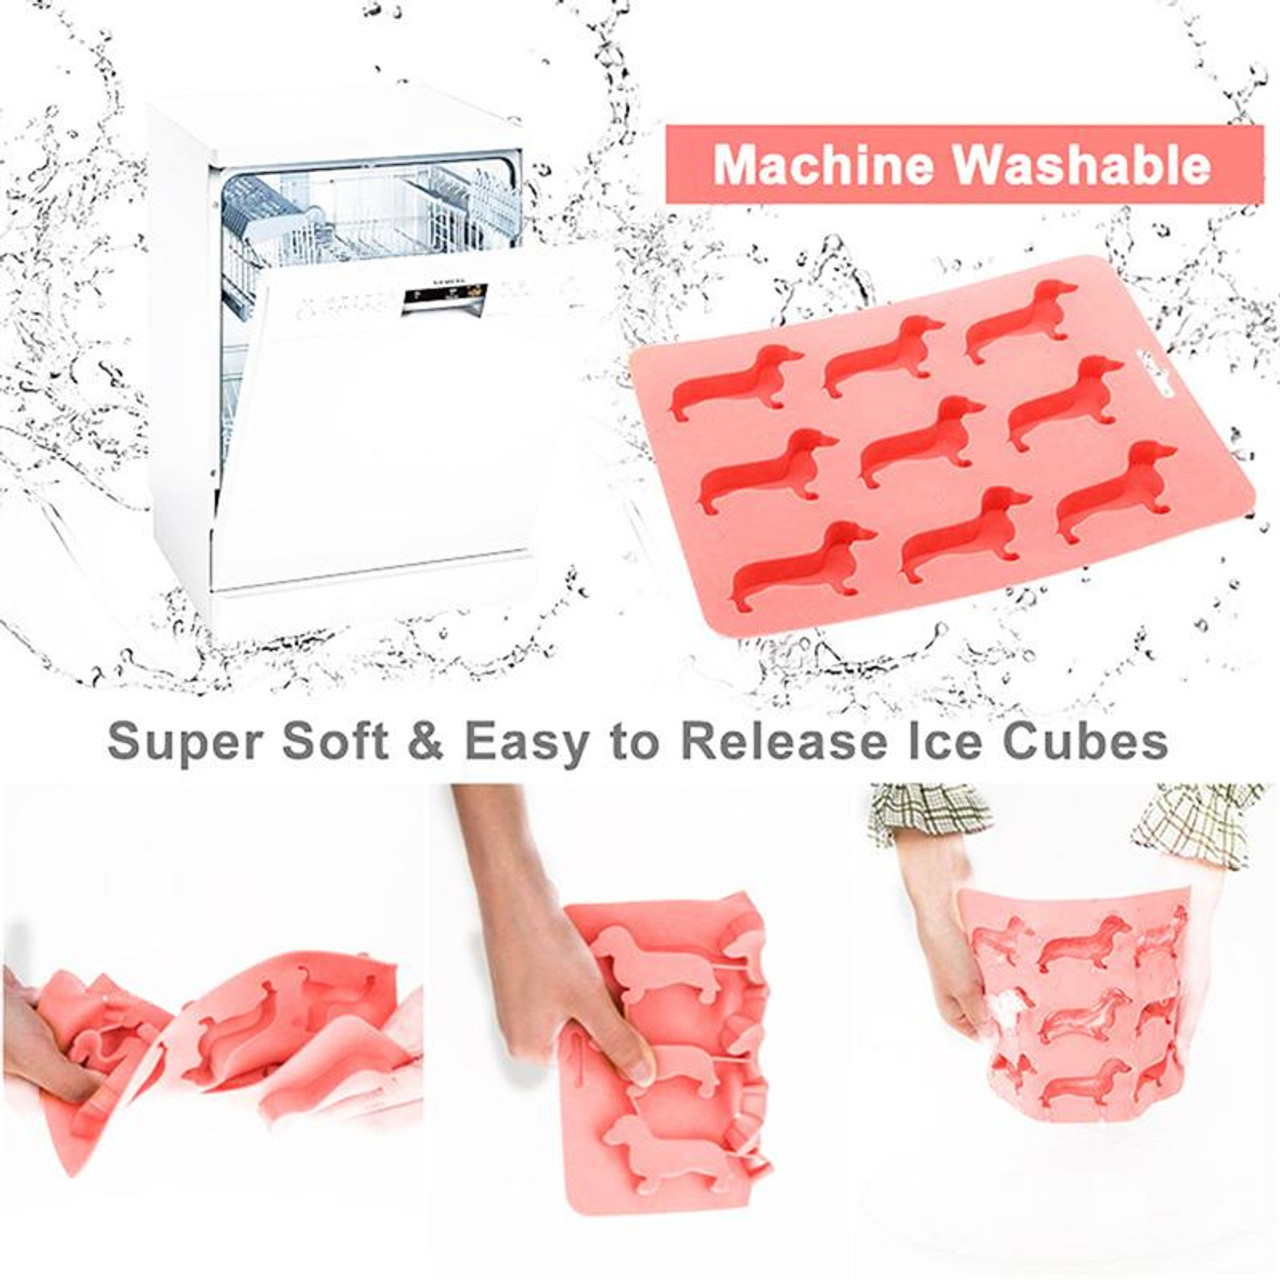 https://cdn11.bigcommerce.com/s-k5cfipcjjt/images/stencil/1280x1280/products/461/1398/ice_tray_washable__79384.1578101551.jpg?c=2